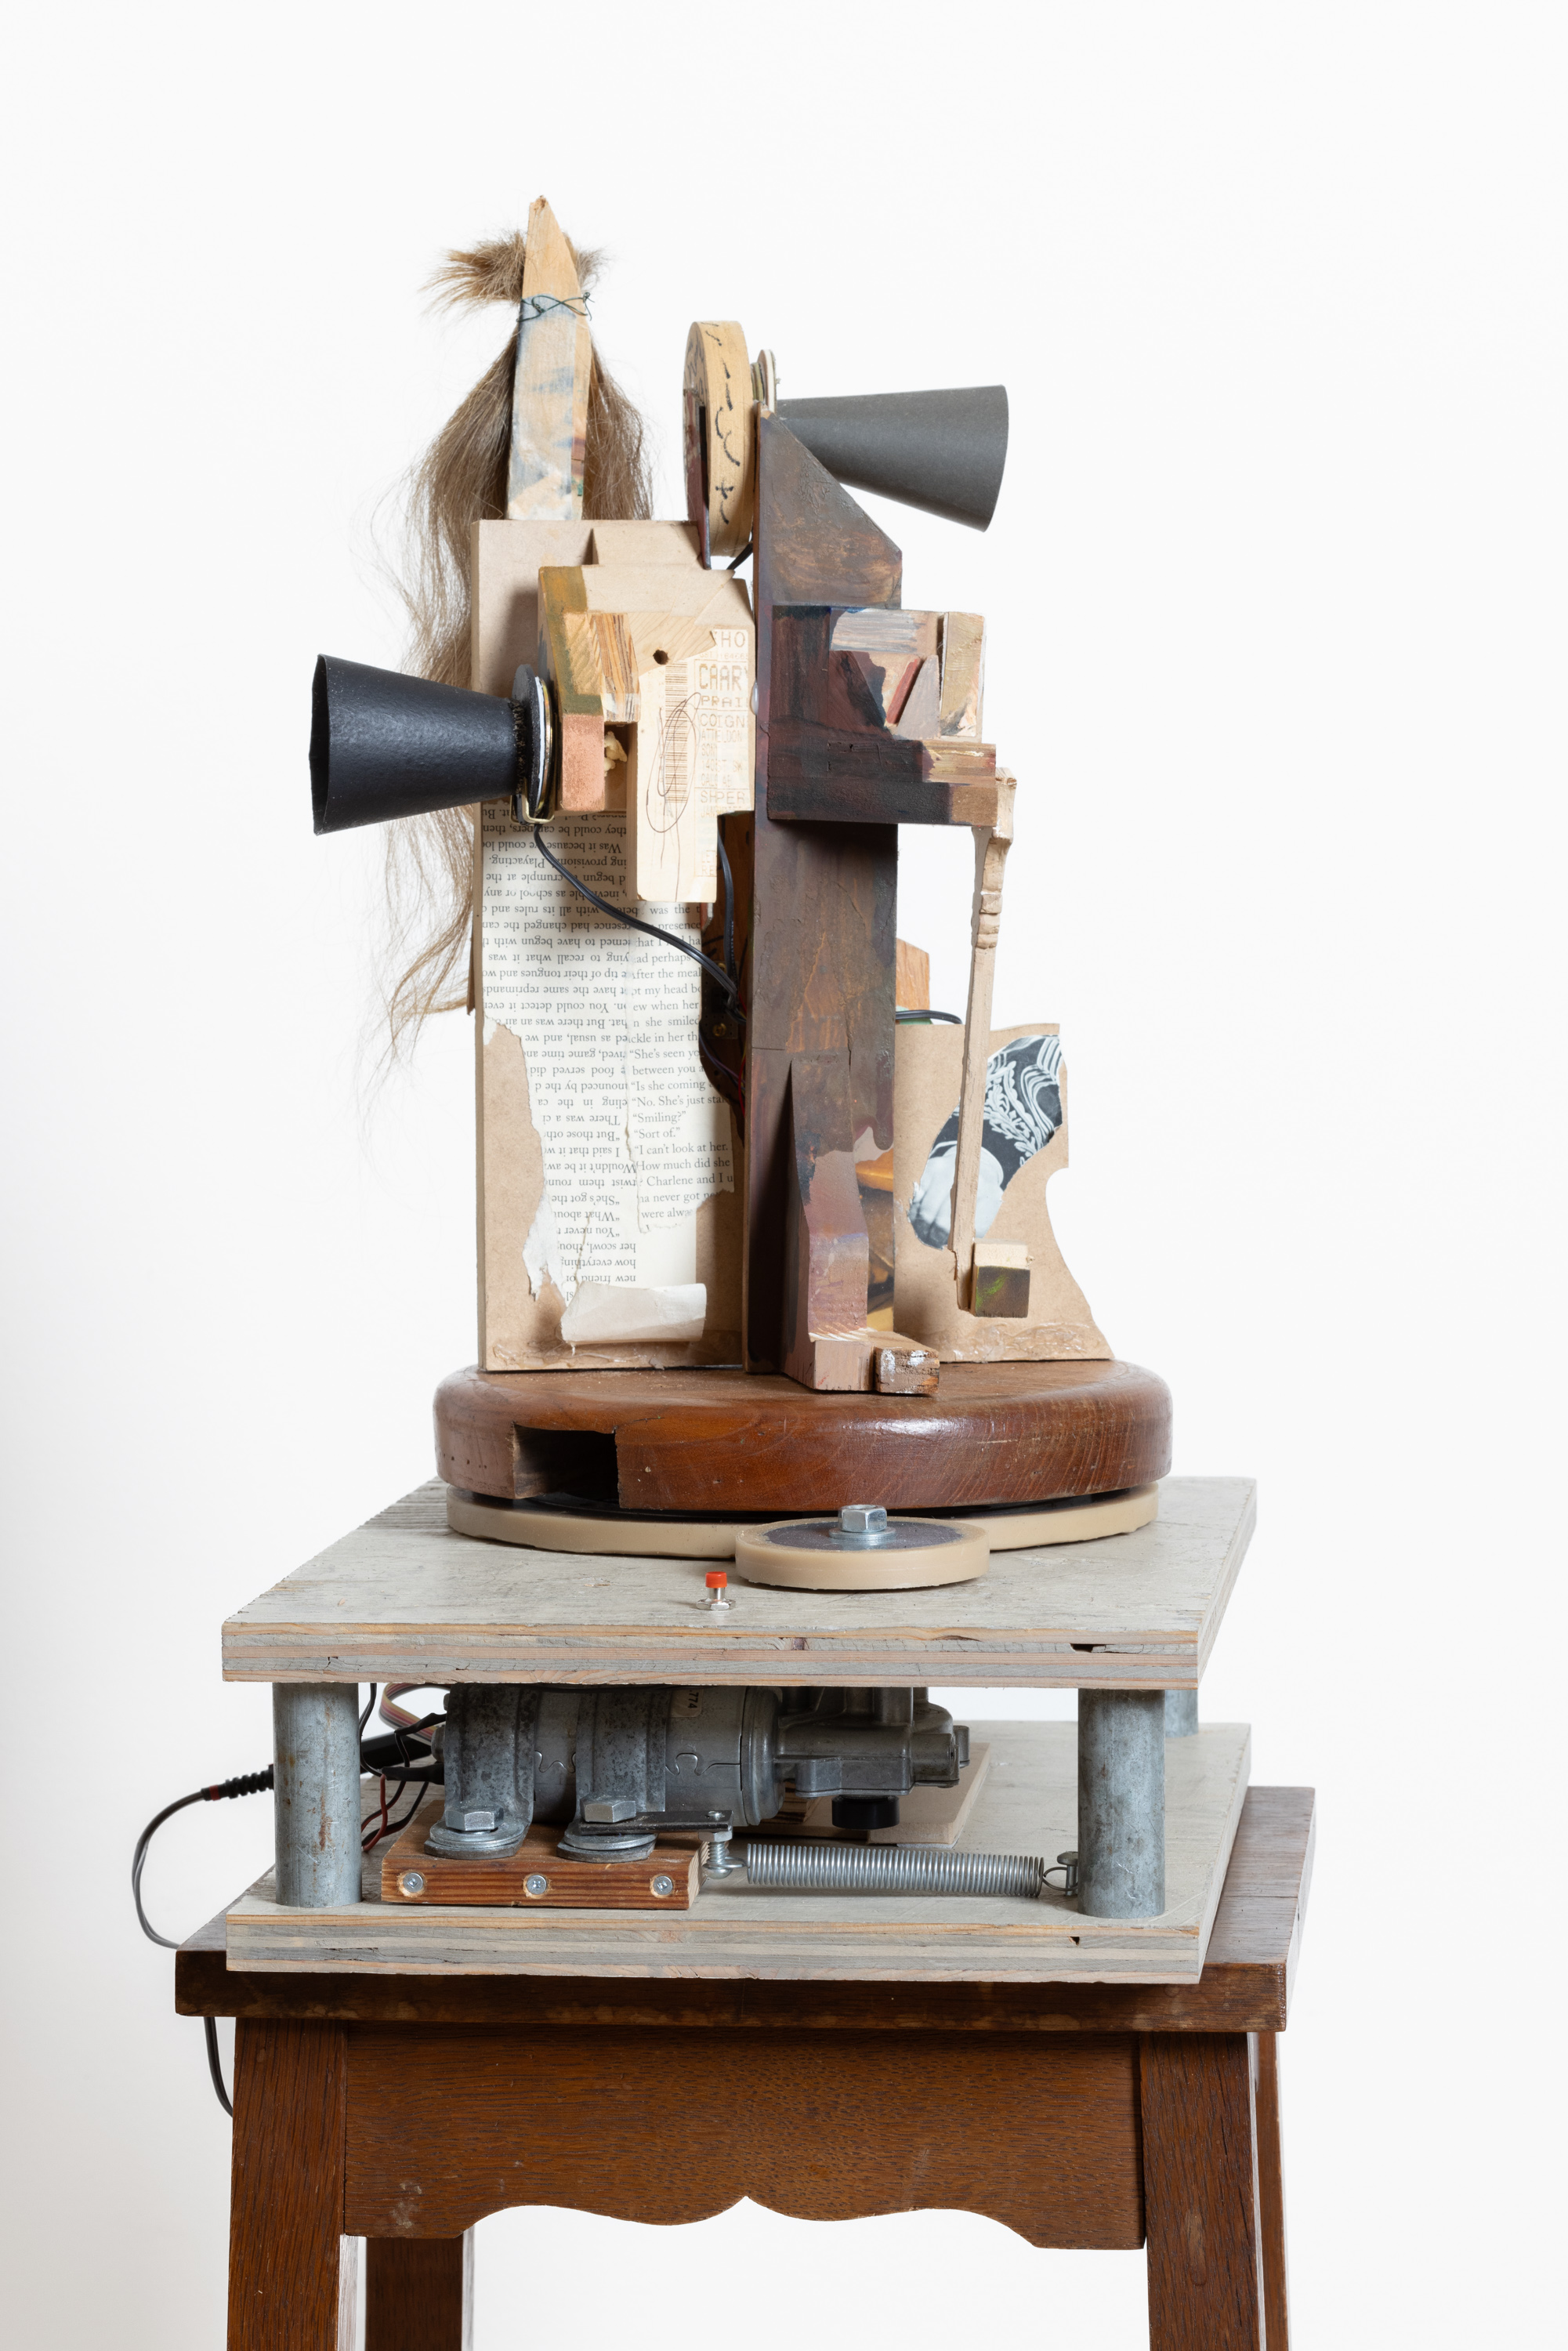 Color image of a mixed media artwork compromised of three gramophones and wooden pieces with collaged photographs and hair on a wooden pedestal